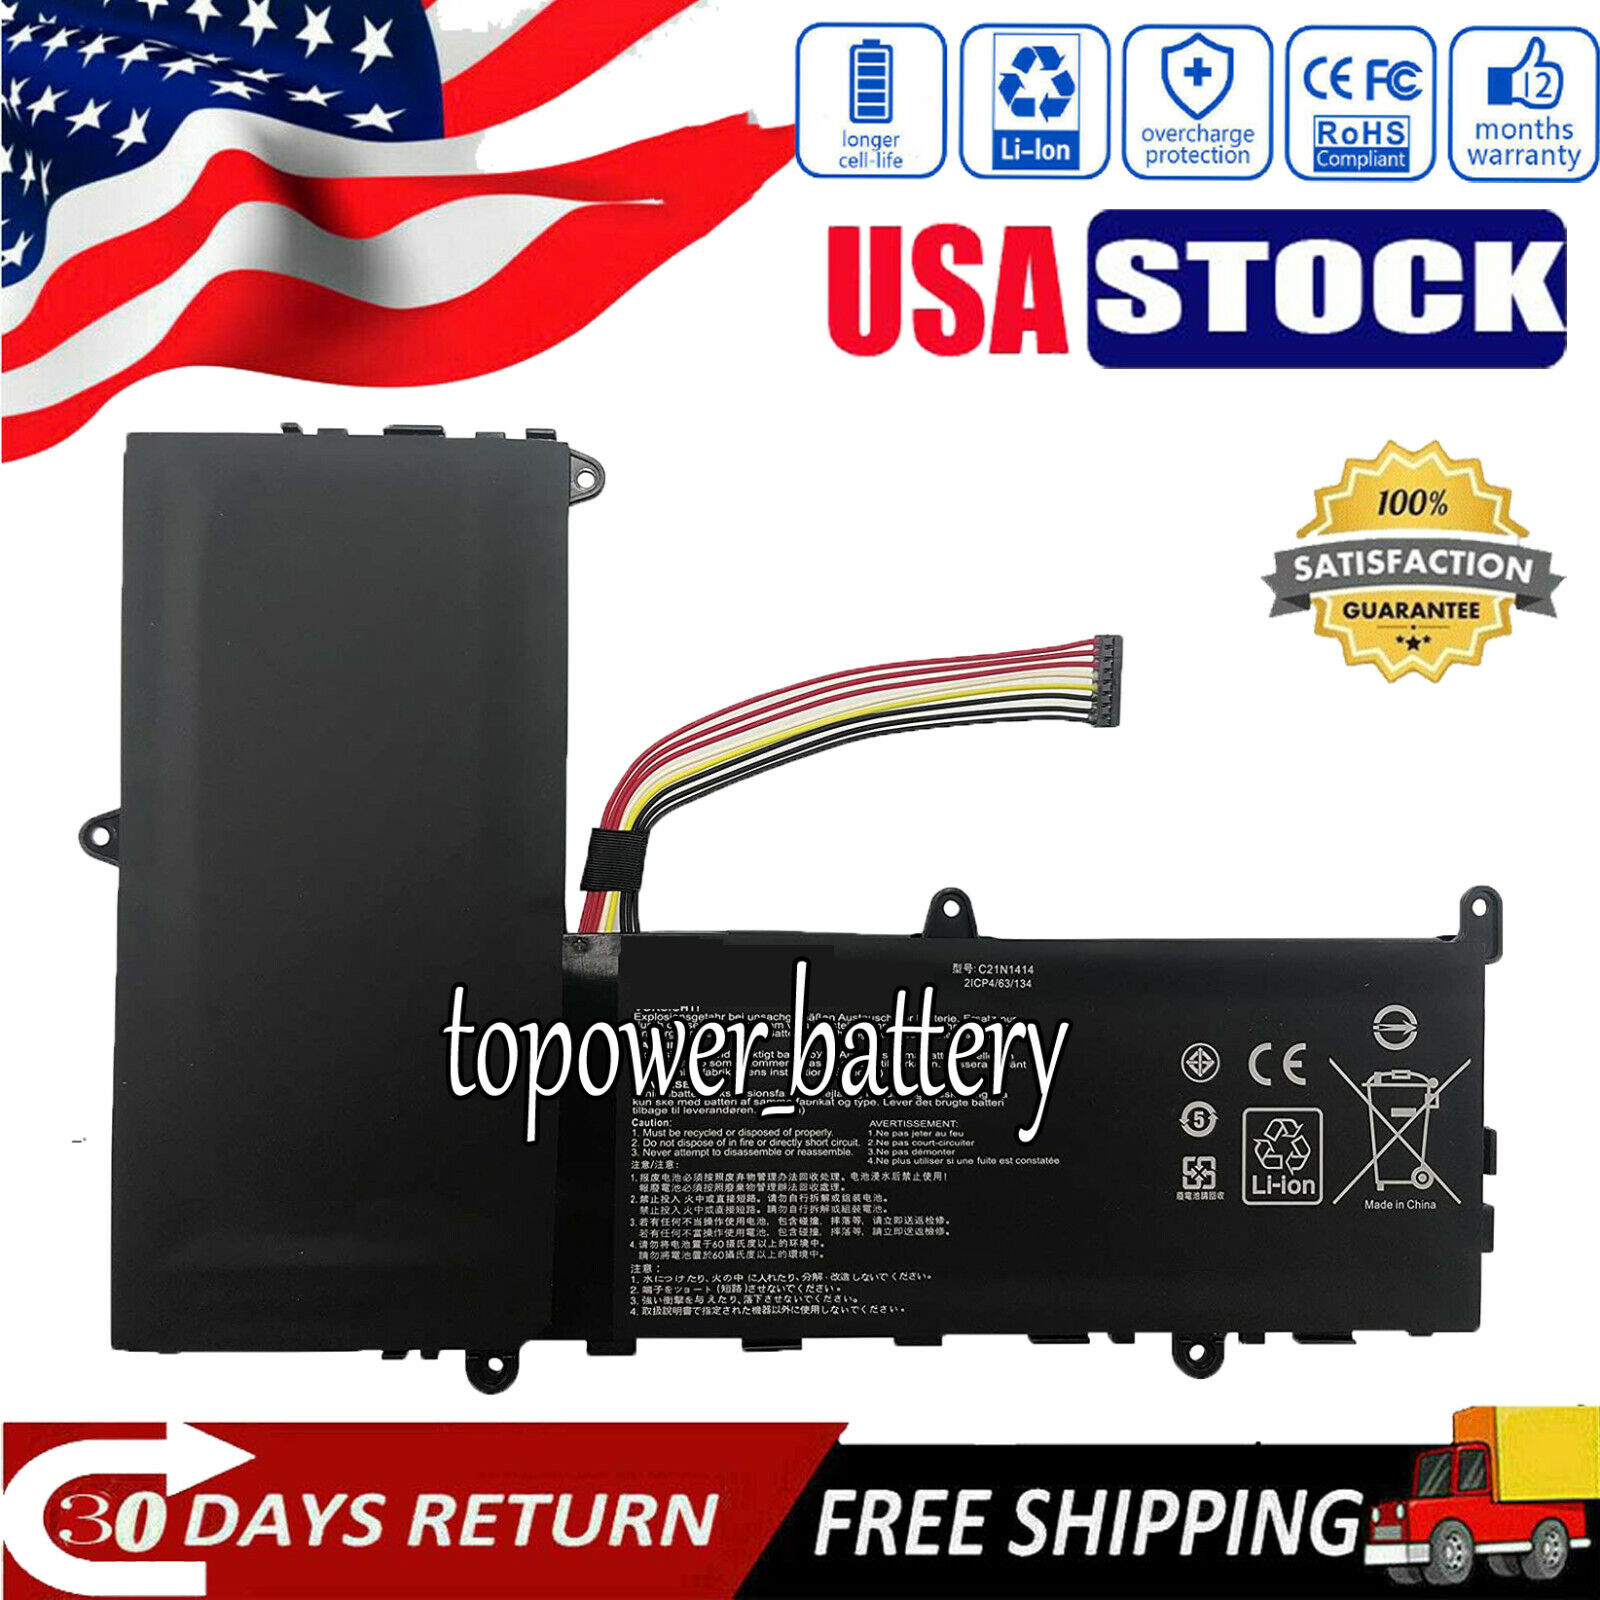 Replacement battery for Asus EeeBook X205 X205TA F205TA X205TA-1R C21N1414 38Wh